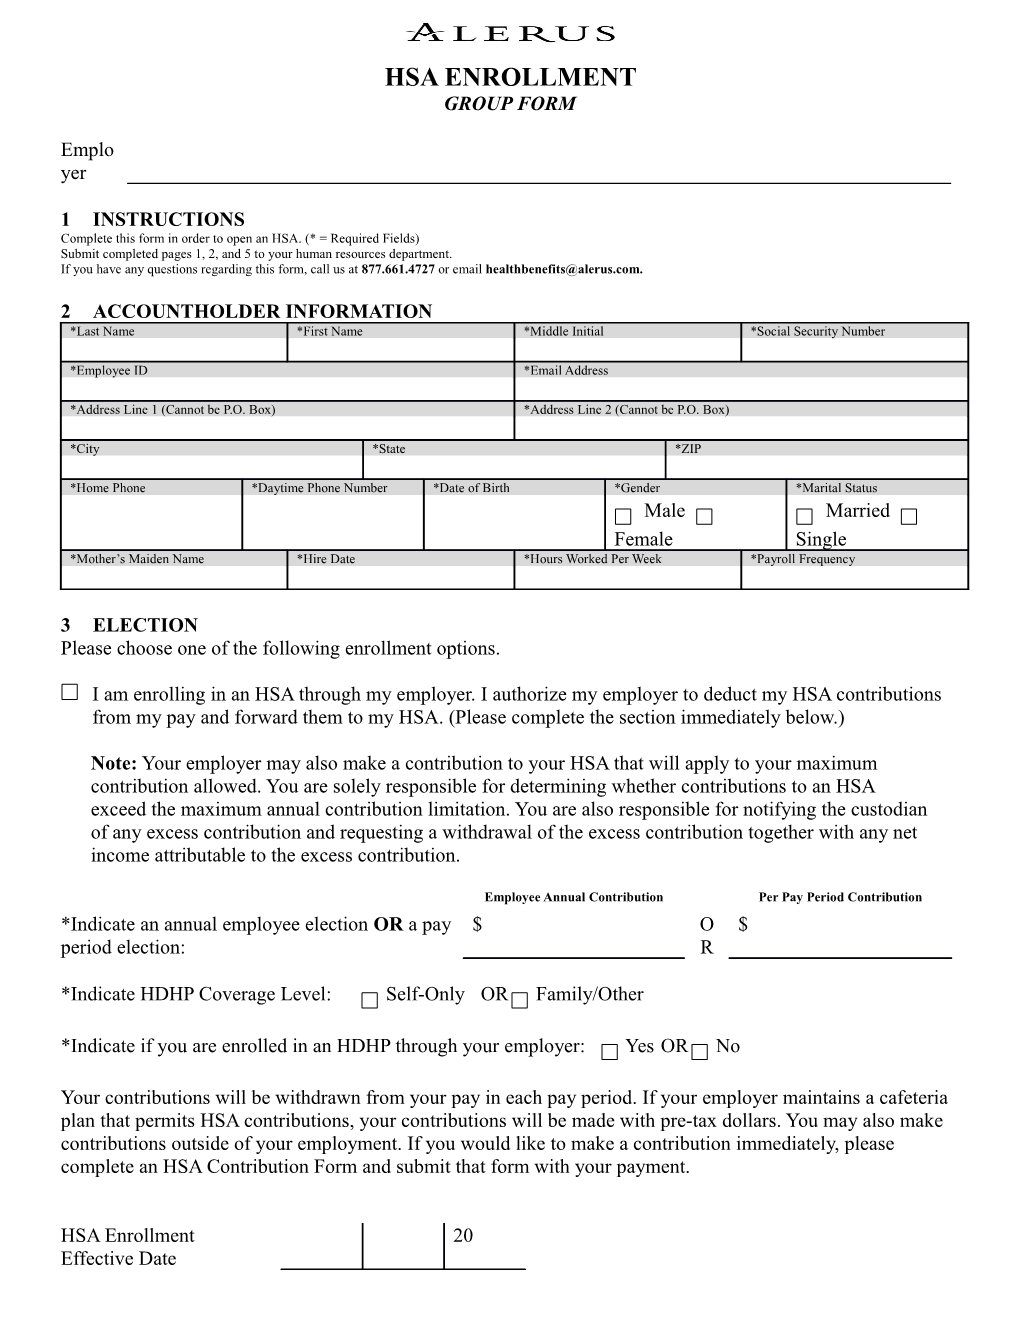 Complete This Form in Order to Open an HSA. (* = Required Fields)